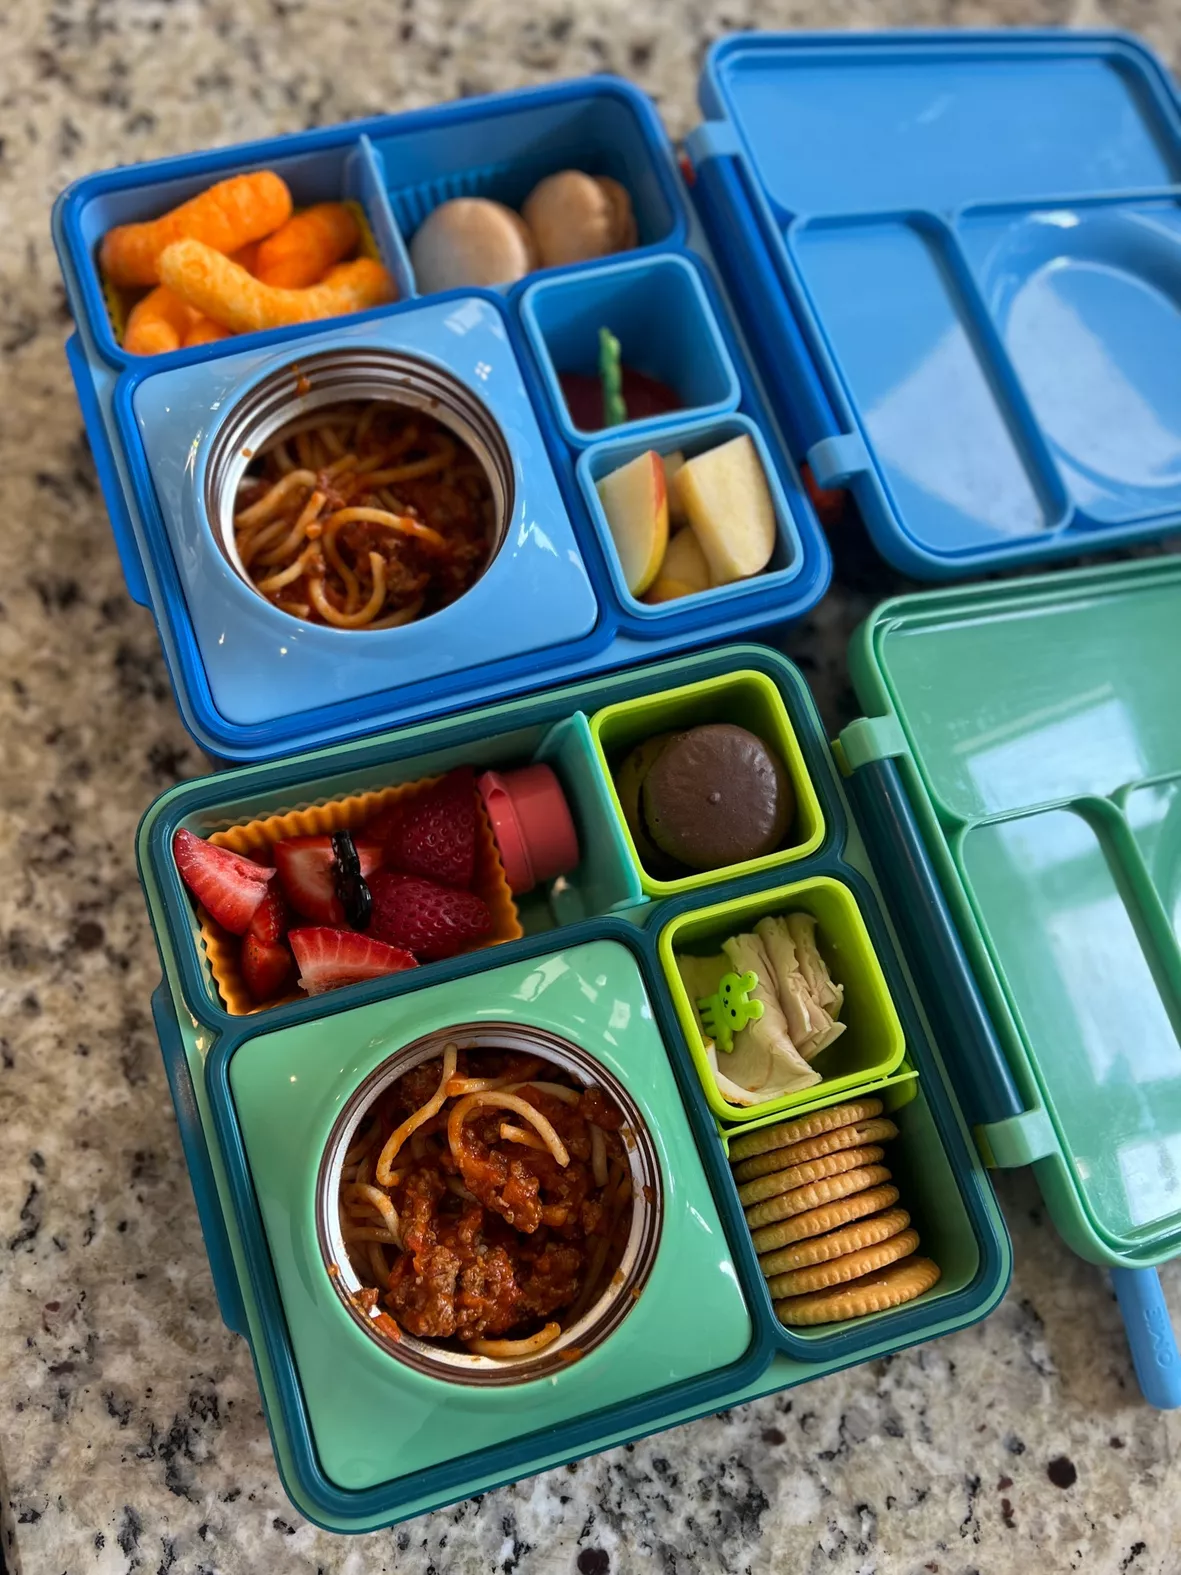  OmieBox Bento Box for Kids - Insulated with Leak Proof